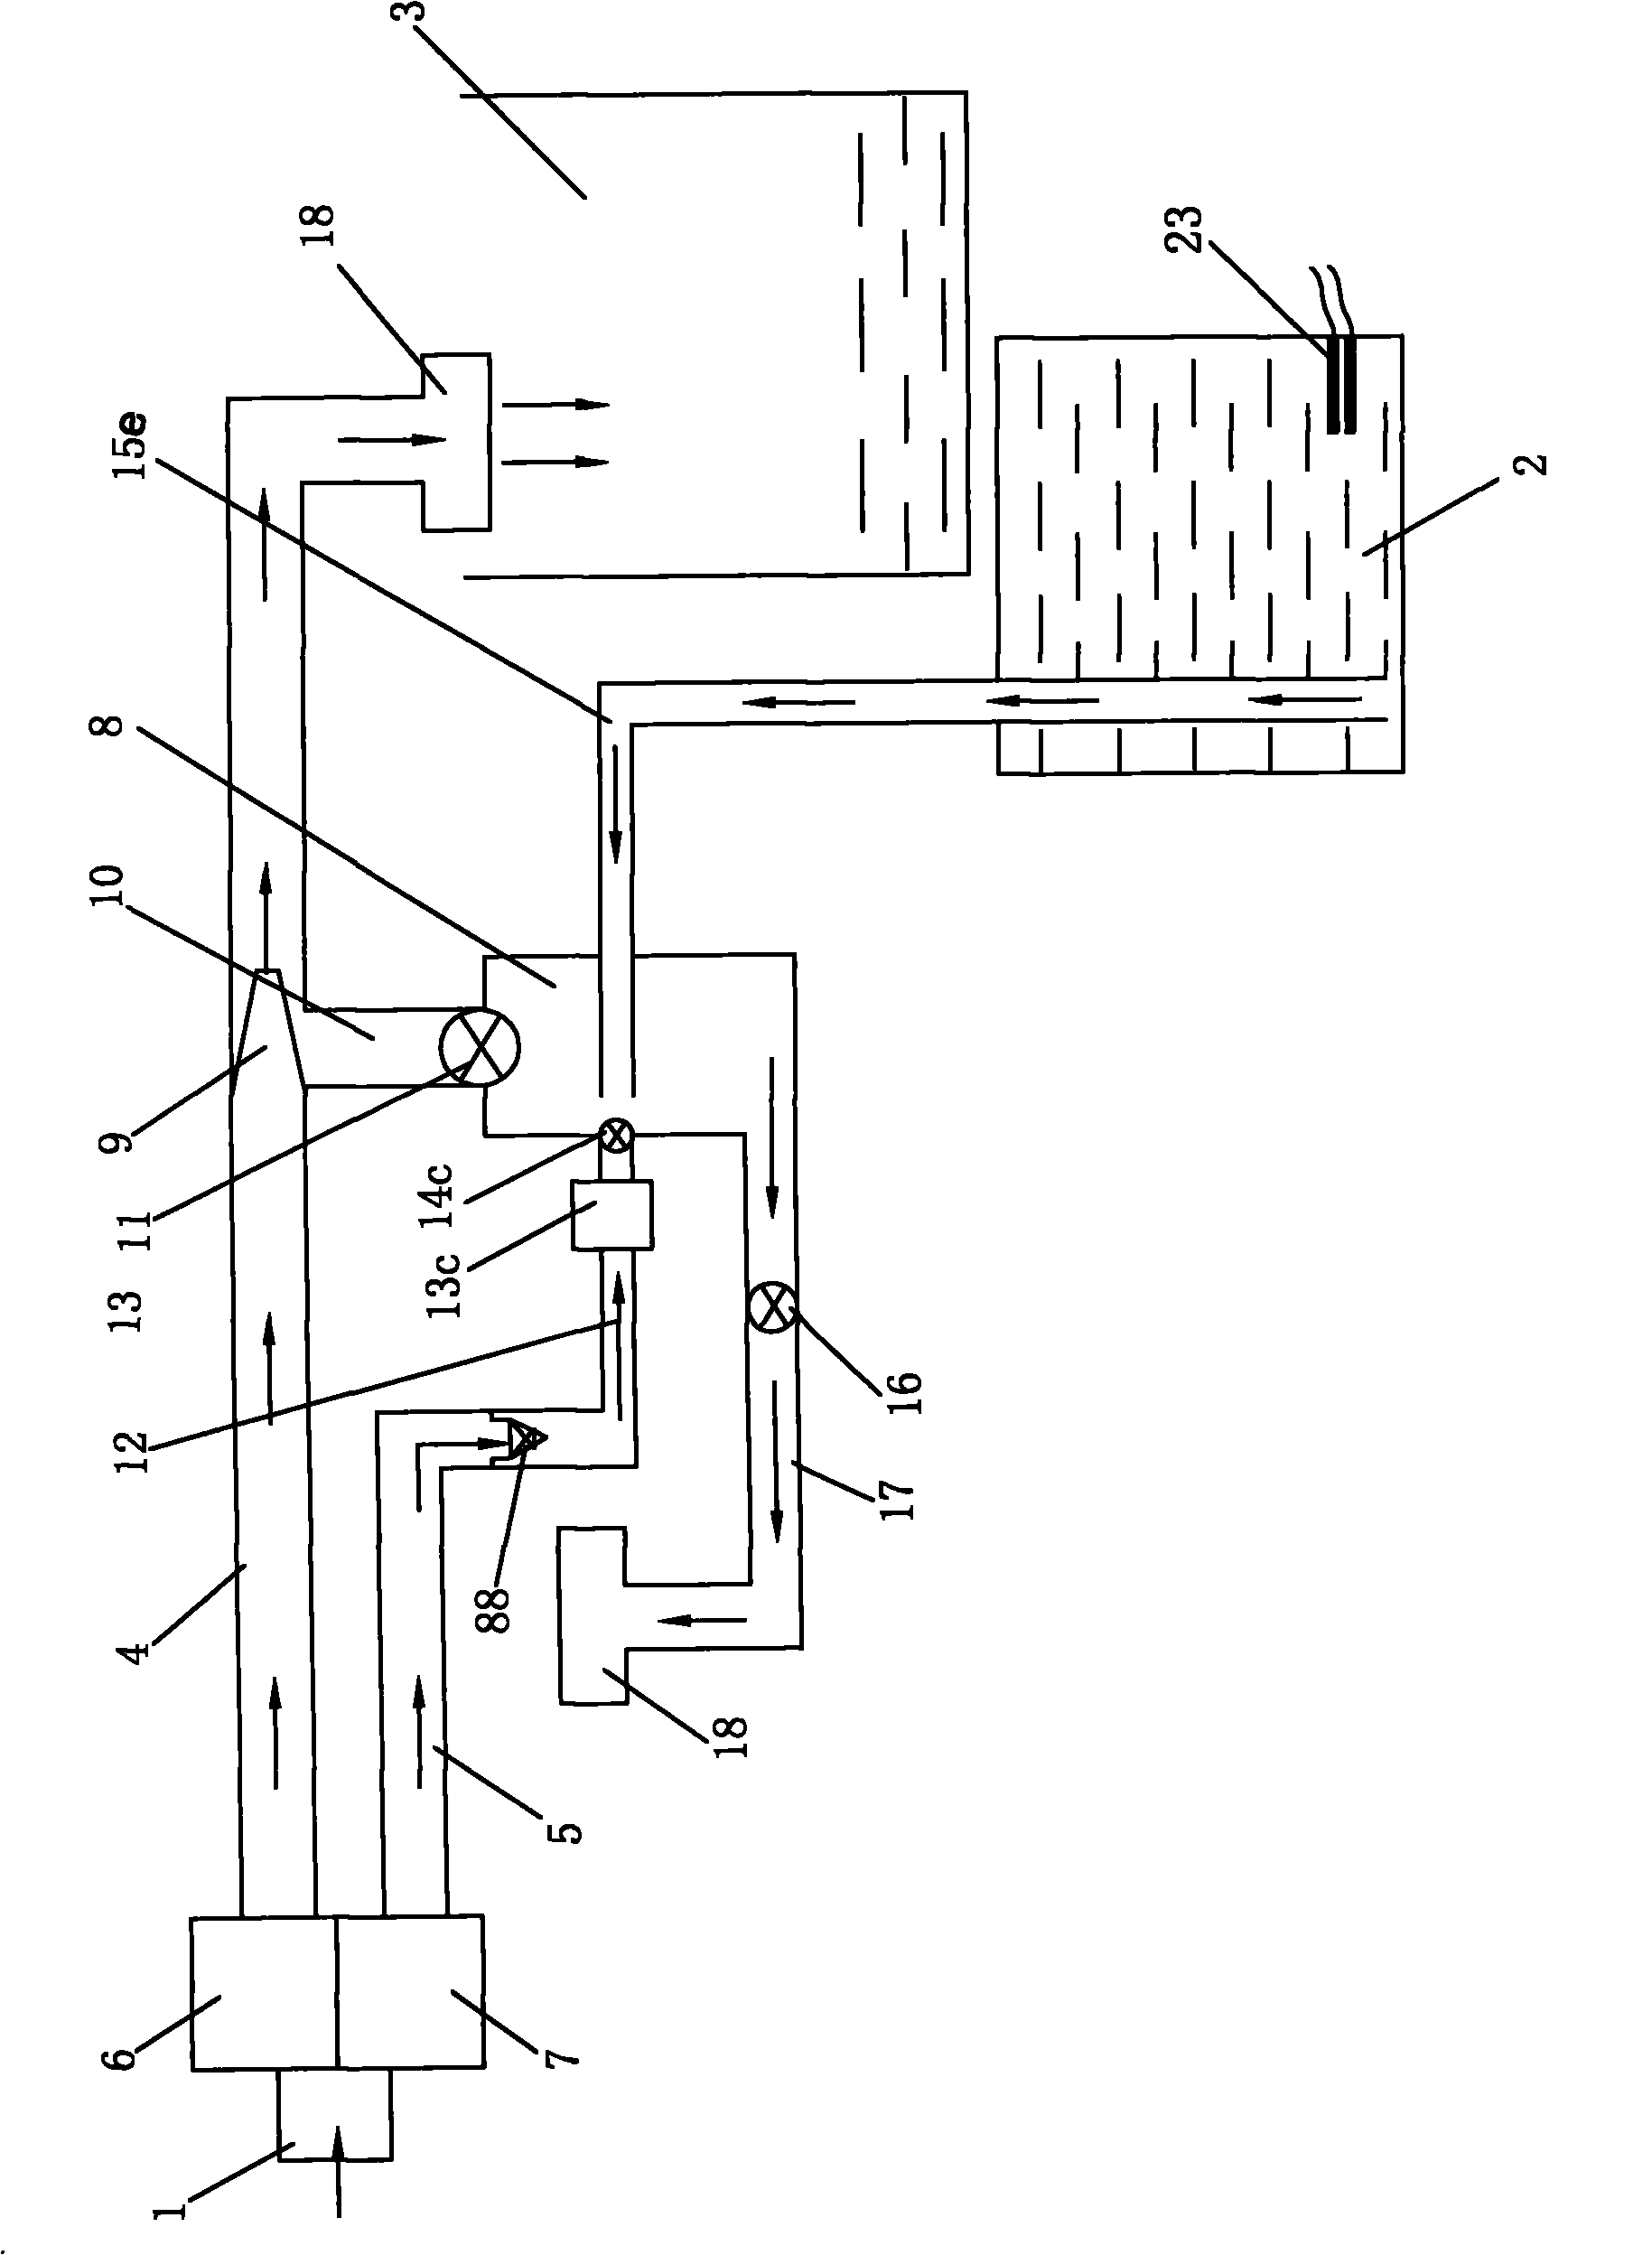 Automatic detergent feeding system